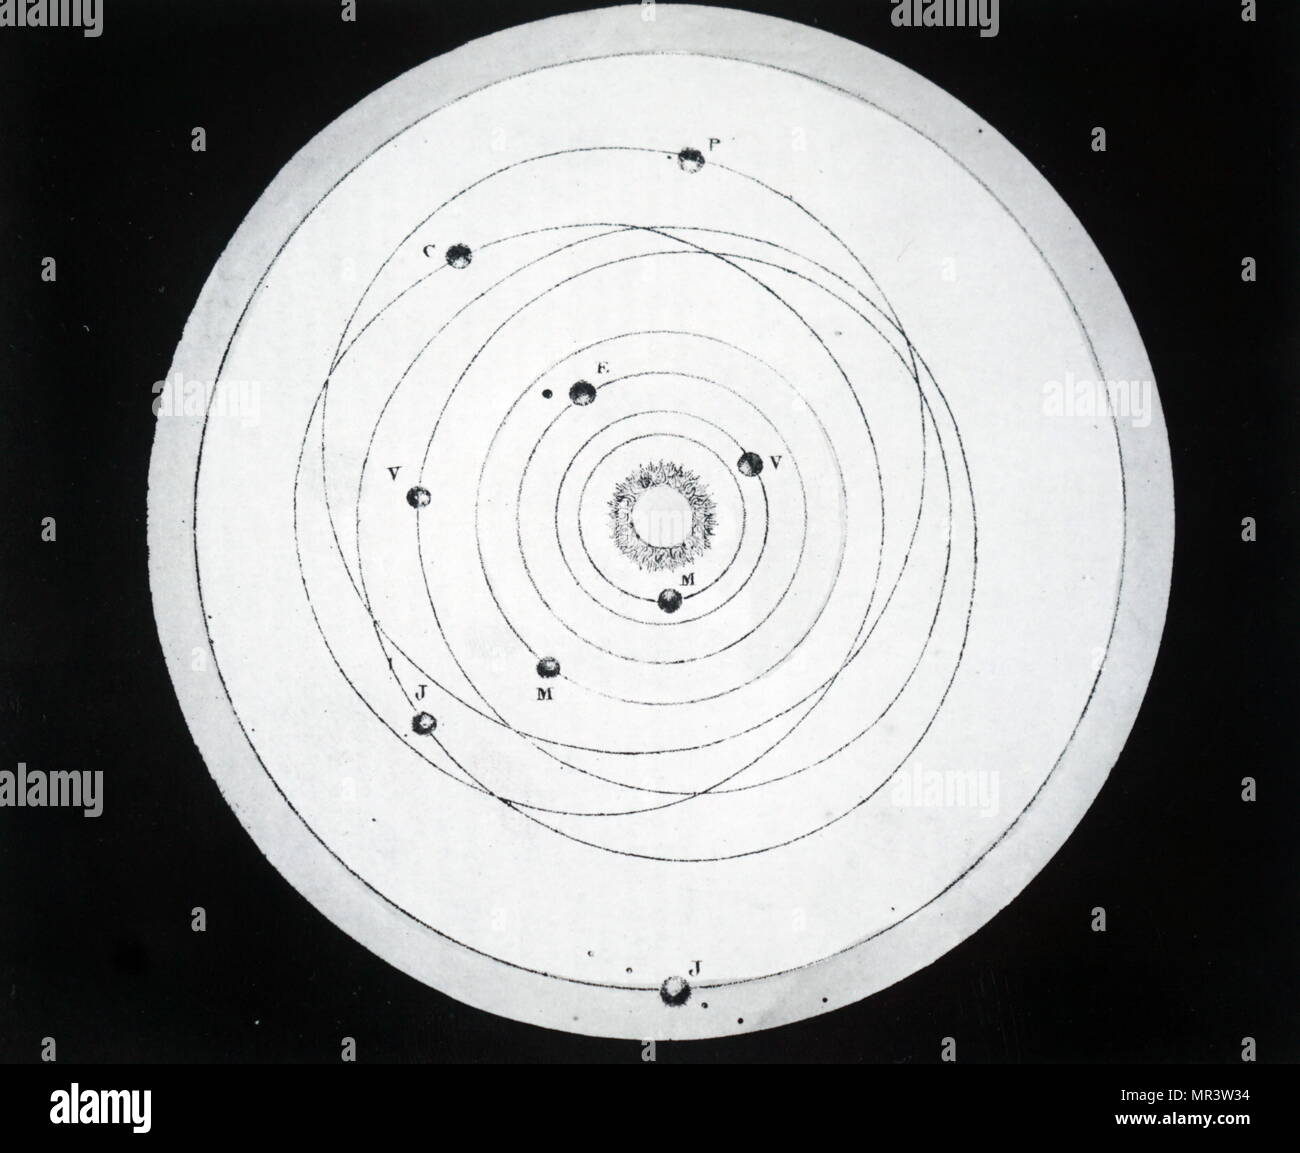 Diagram of the solar system, showing the zone of asteroids/planetoids between Mars and Jupiter. Dated 19th century Stock Photo